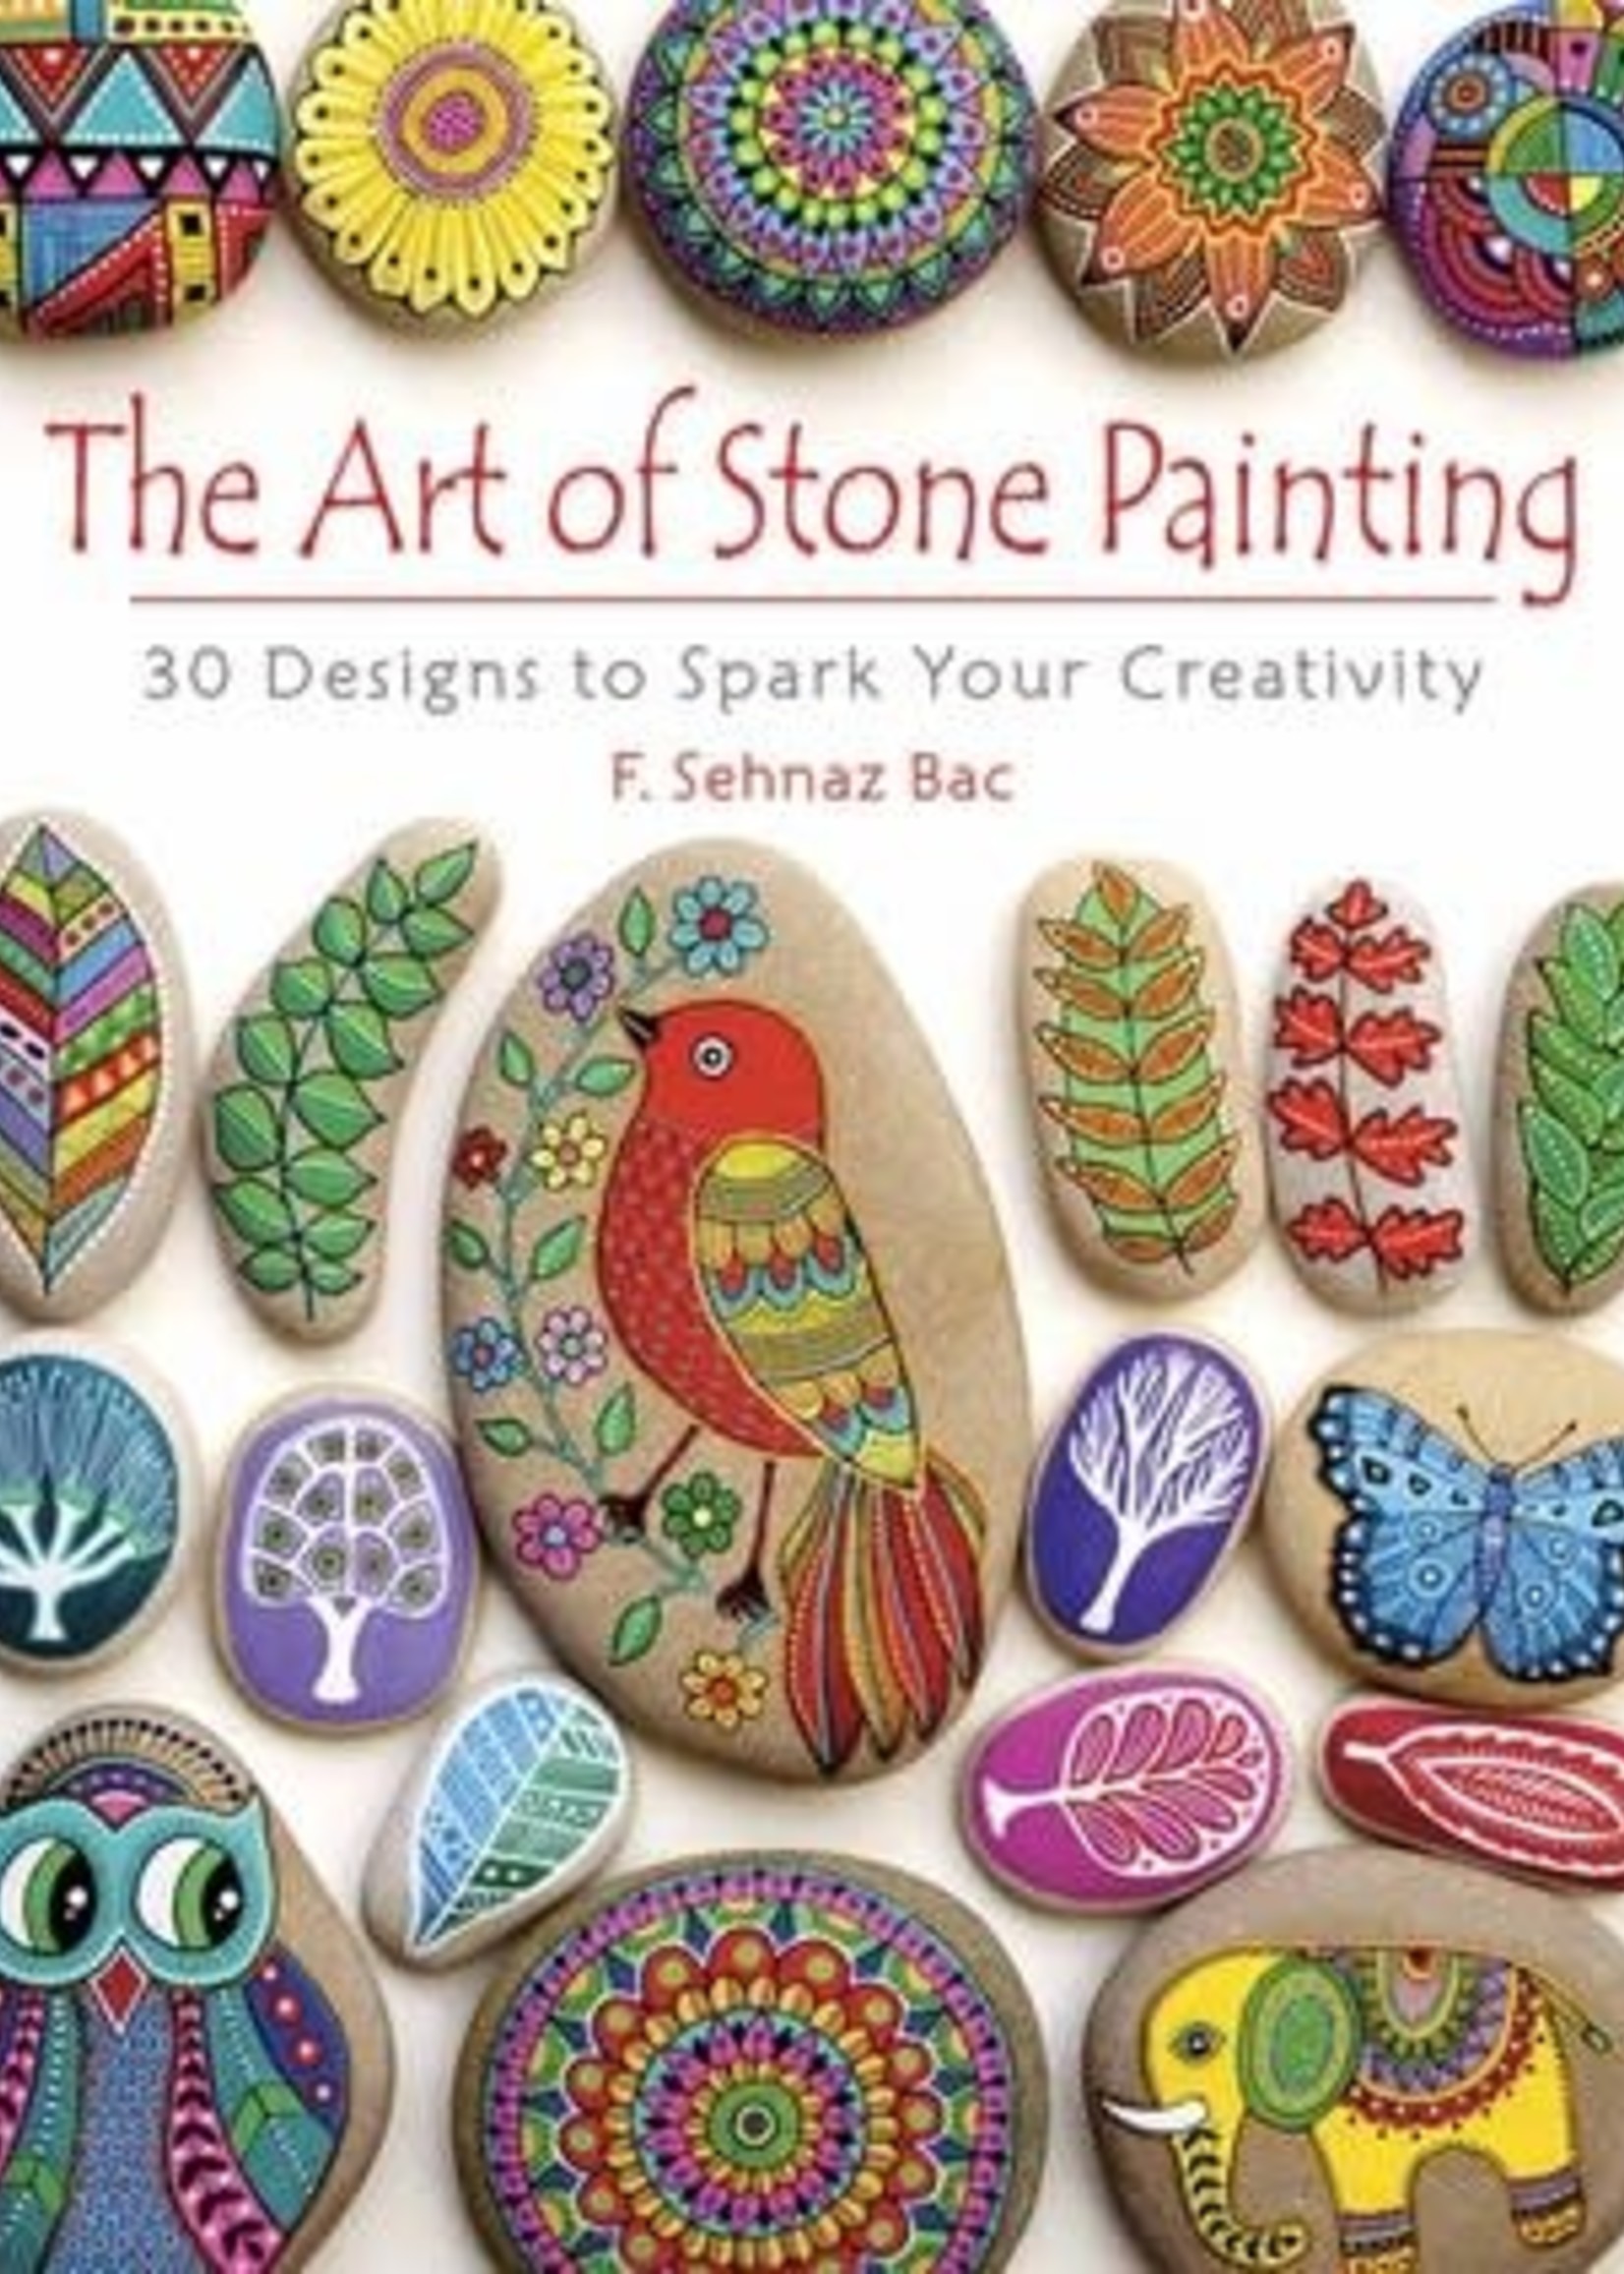 The Art of Stone Painting: 30 Designs to Spark Your Creativity by F. Sehnaz Bac